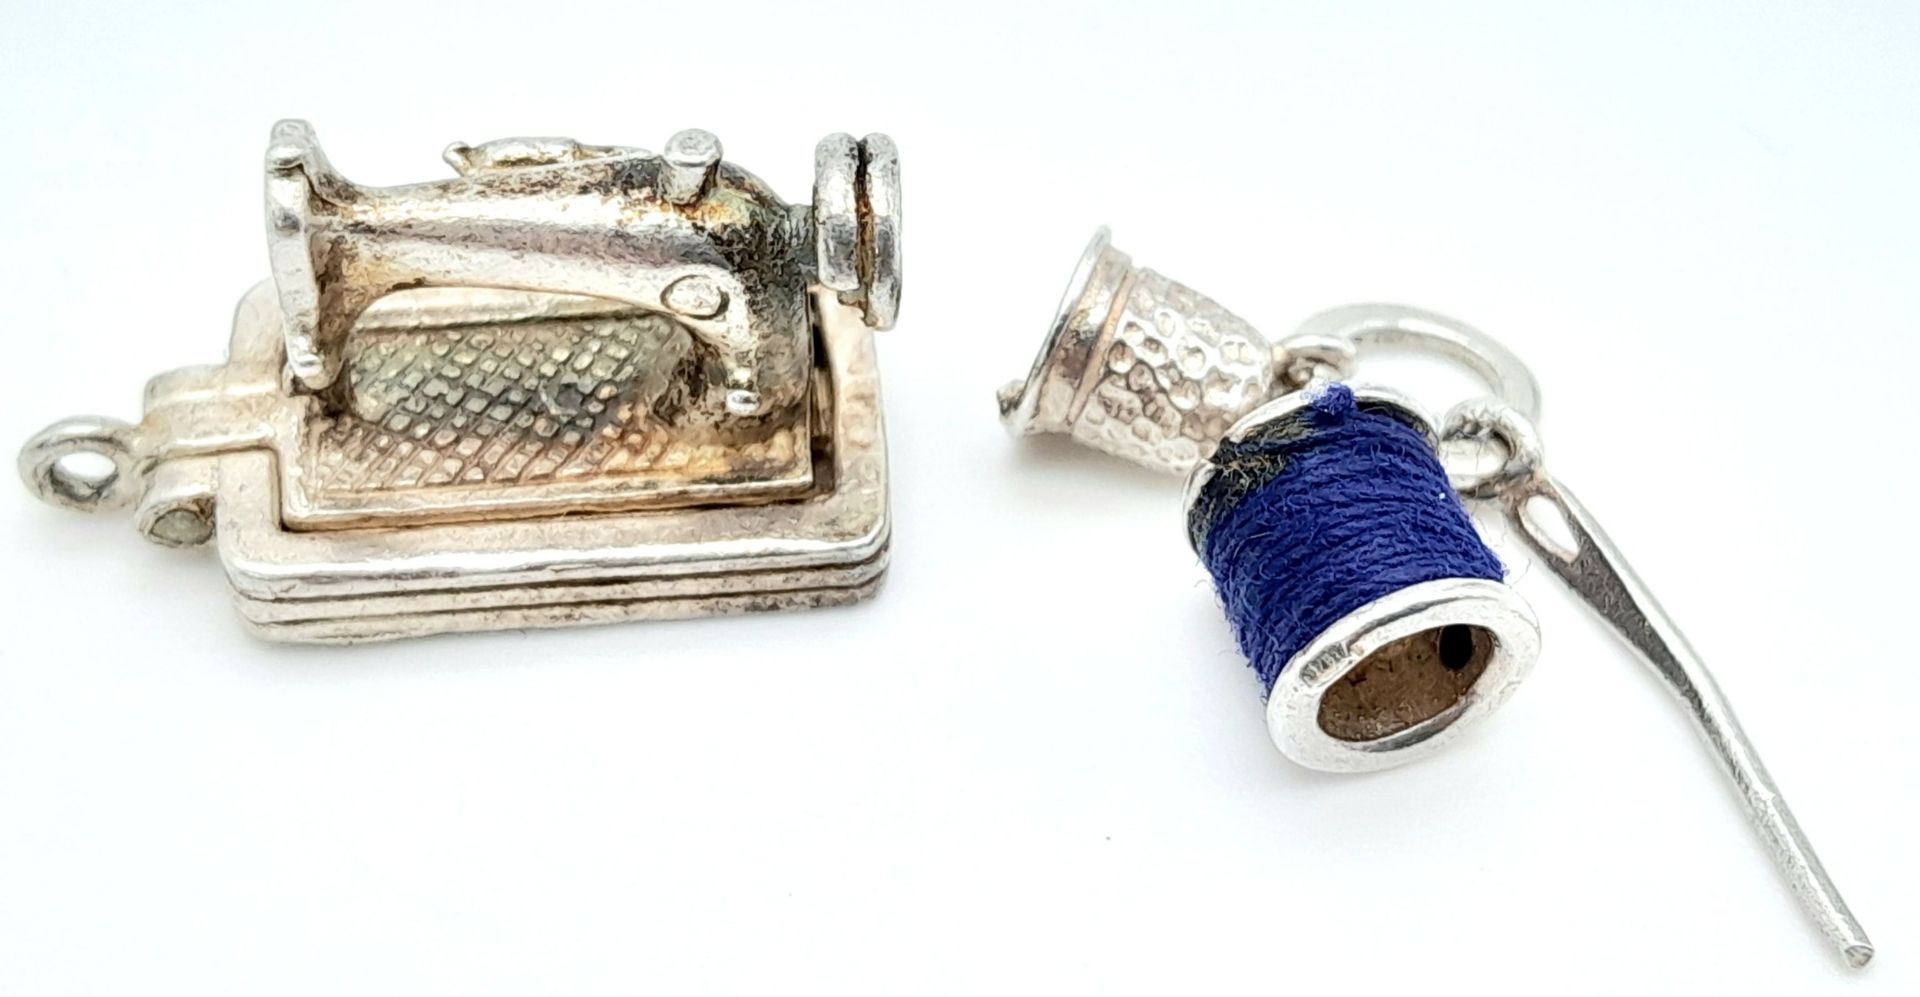 2 X STERLING SILVER SOWING THEMED CHARMS - sewing machine, and thimble, thread & needle. 1.9cm and